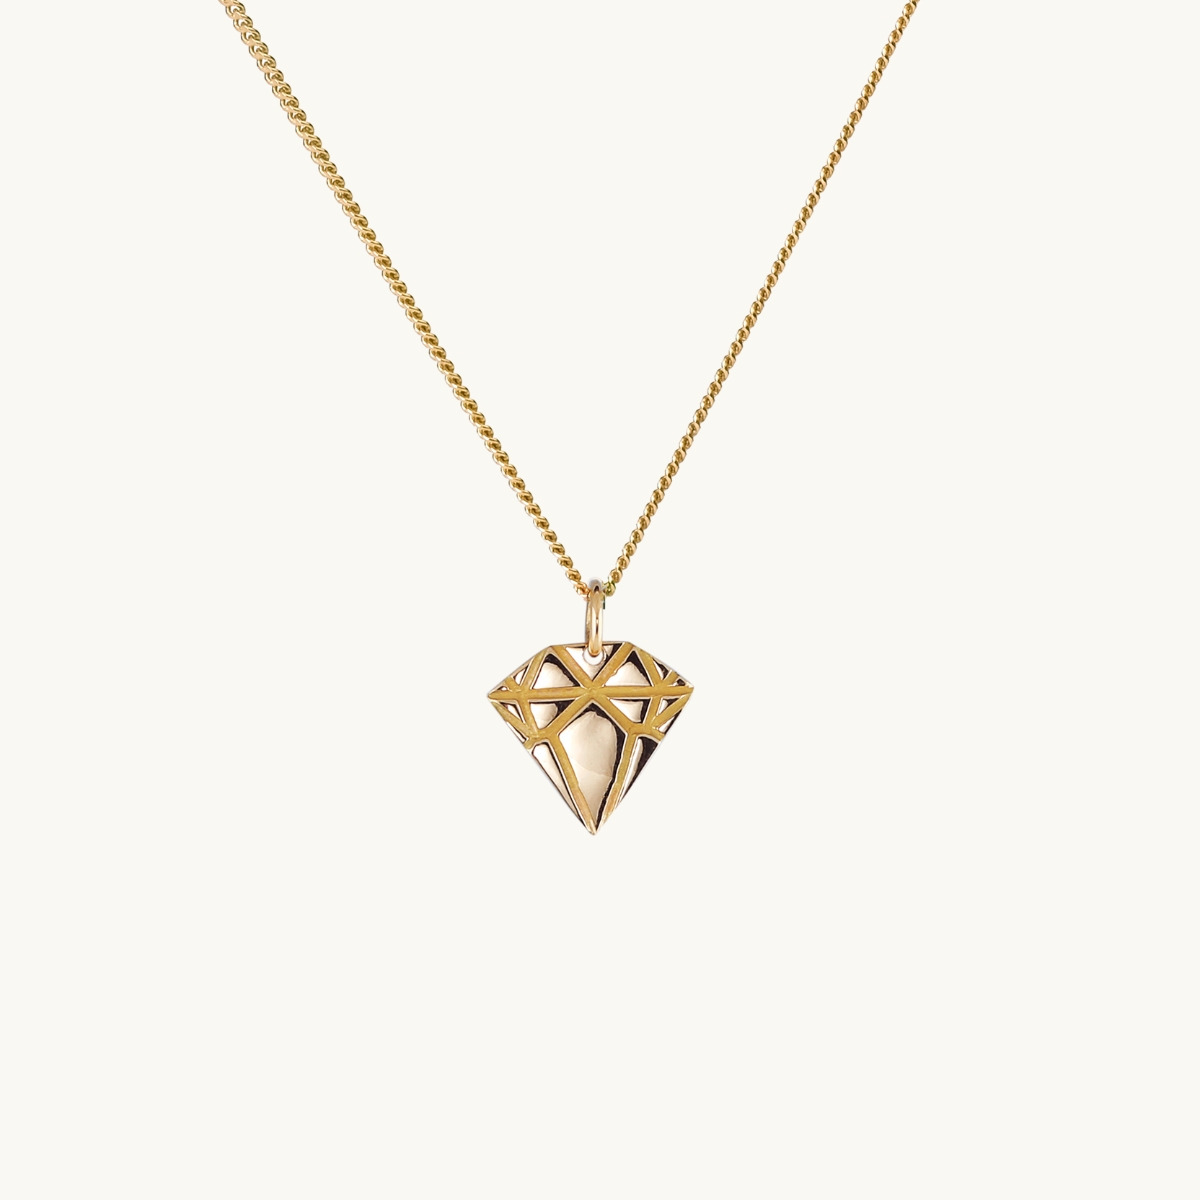 Necklace small diamond in 18K gold 